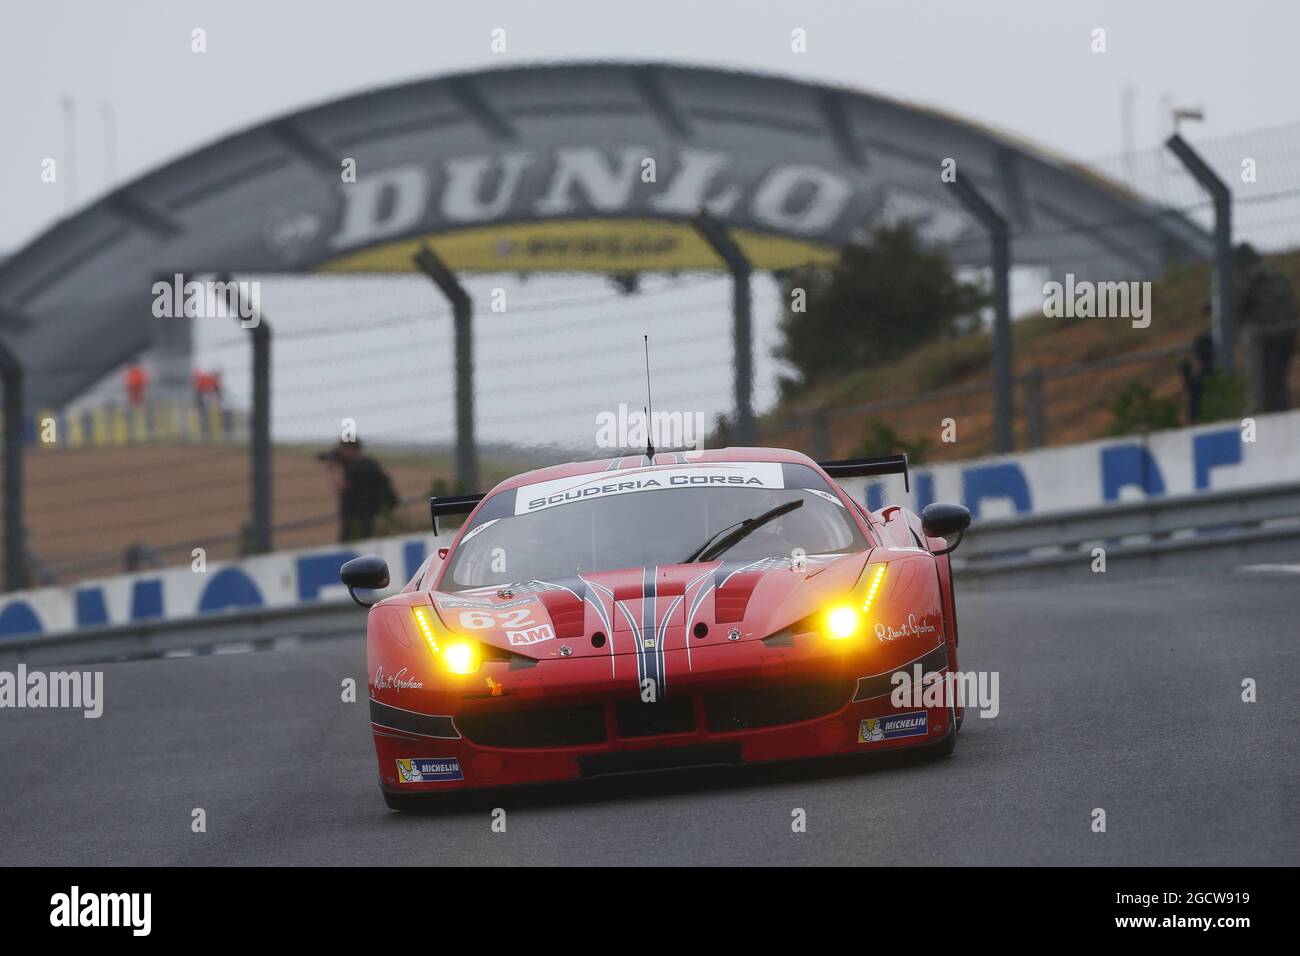 William Sweedler (USA) / Townsend Bell (USA) / Jeffrey Segal (USA) #62 AF Corse Ferrari F458 Italia. Le Mans Testing, Friday 29th - Sunday 31st May 2015. Le Mans, France. Stock Photo